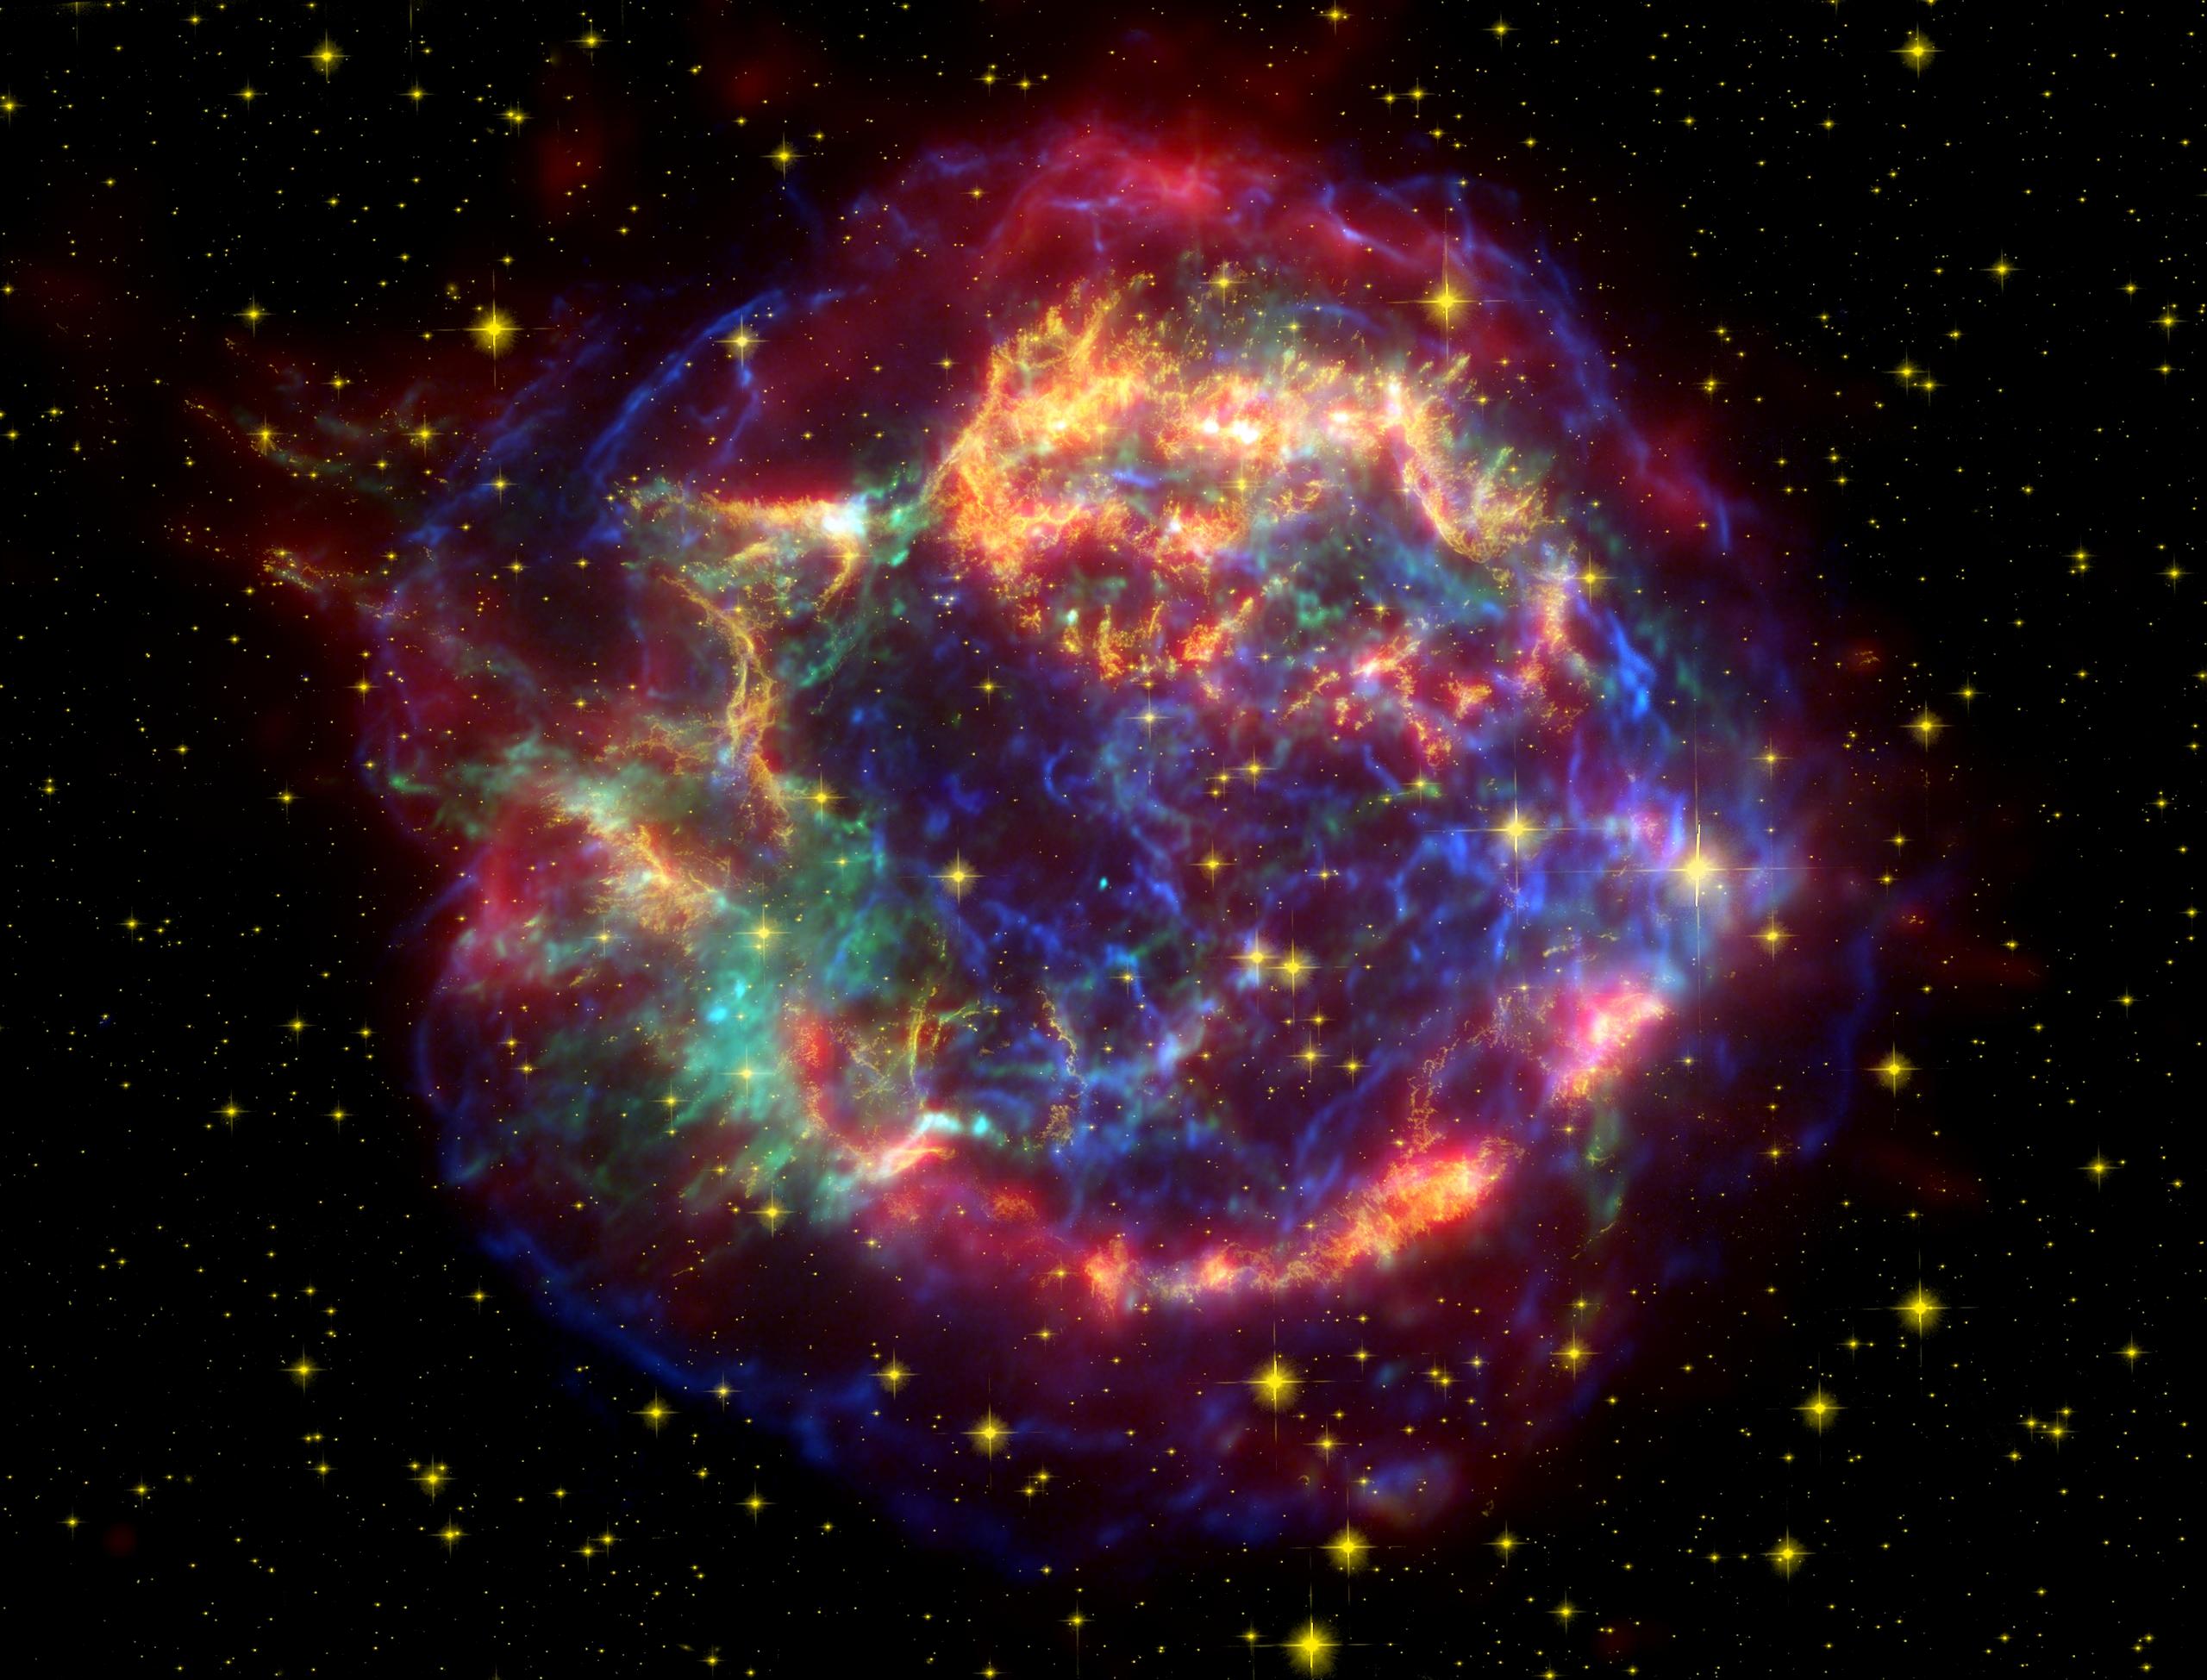 cassiopeia-a-from-hubble-and-spitzer.jpg